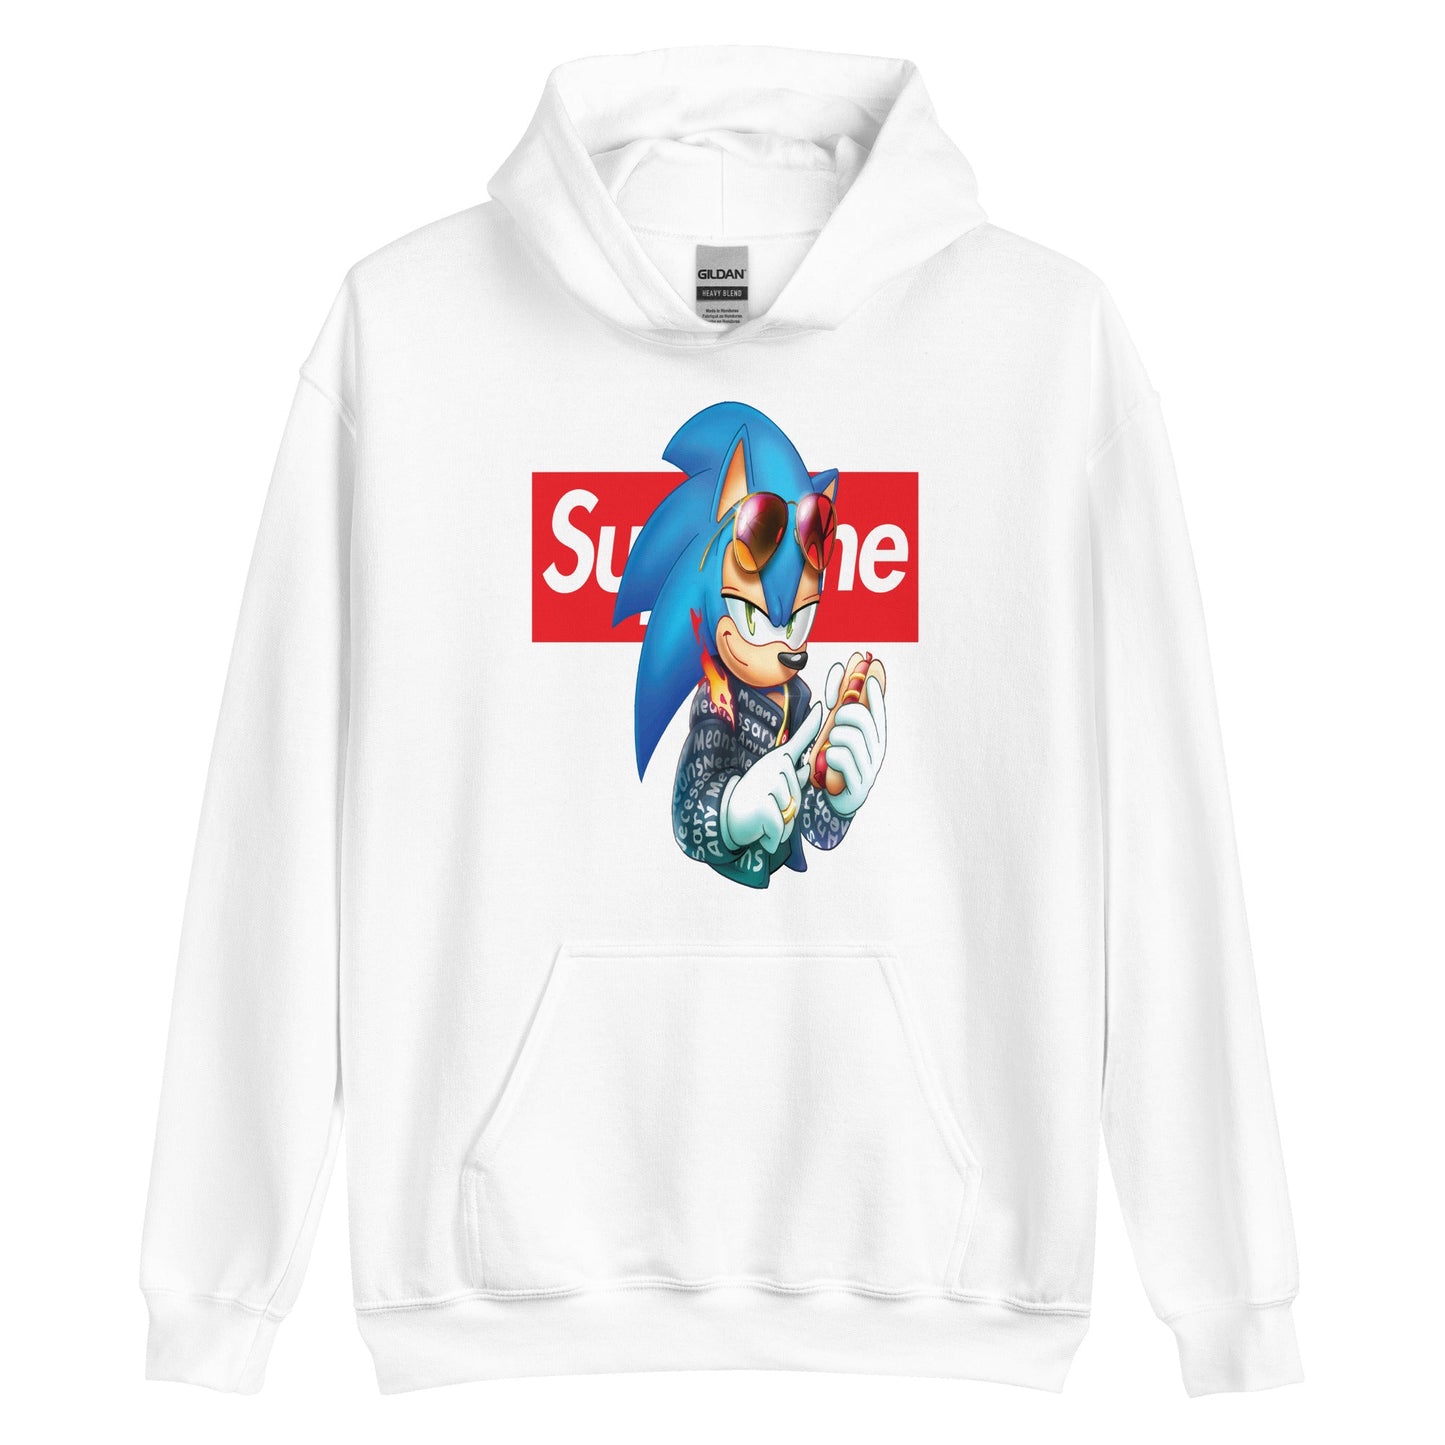 sup sonic hoodie - The Truth Graphics